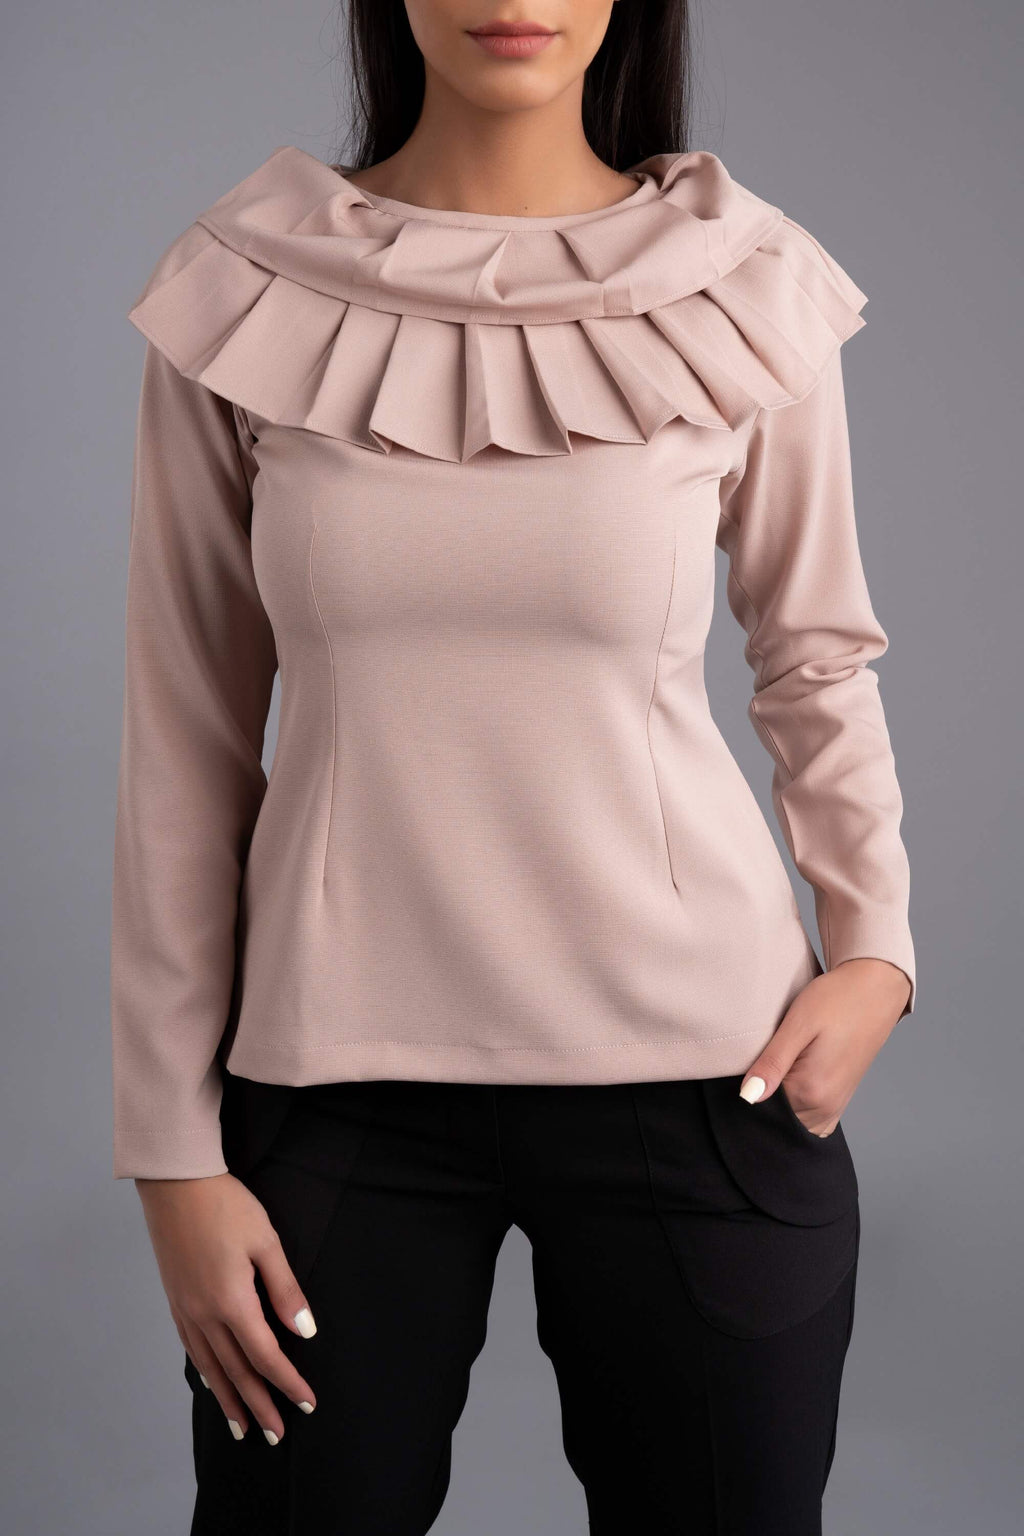 Ihlara Long Sleeve Blouse with Frill Collar-Beige - The Modernest